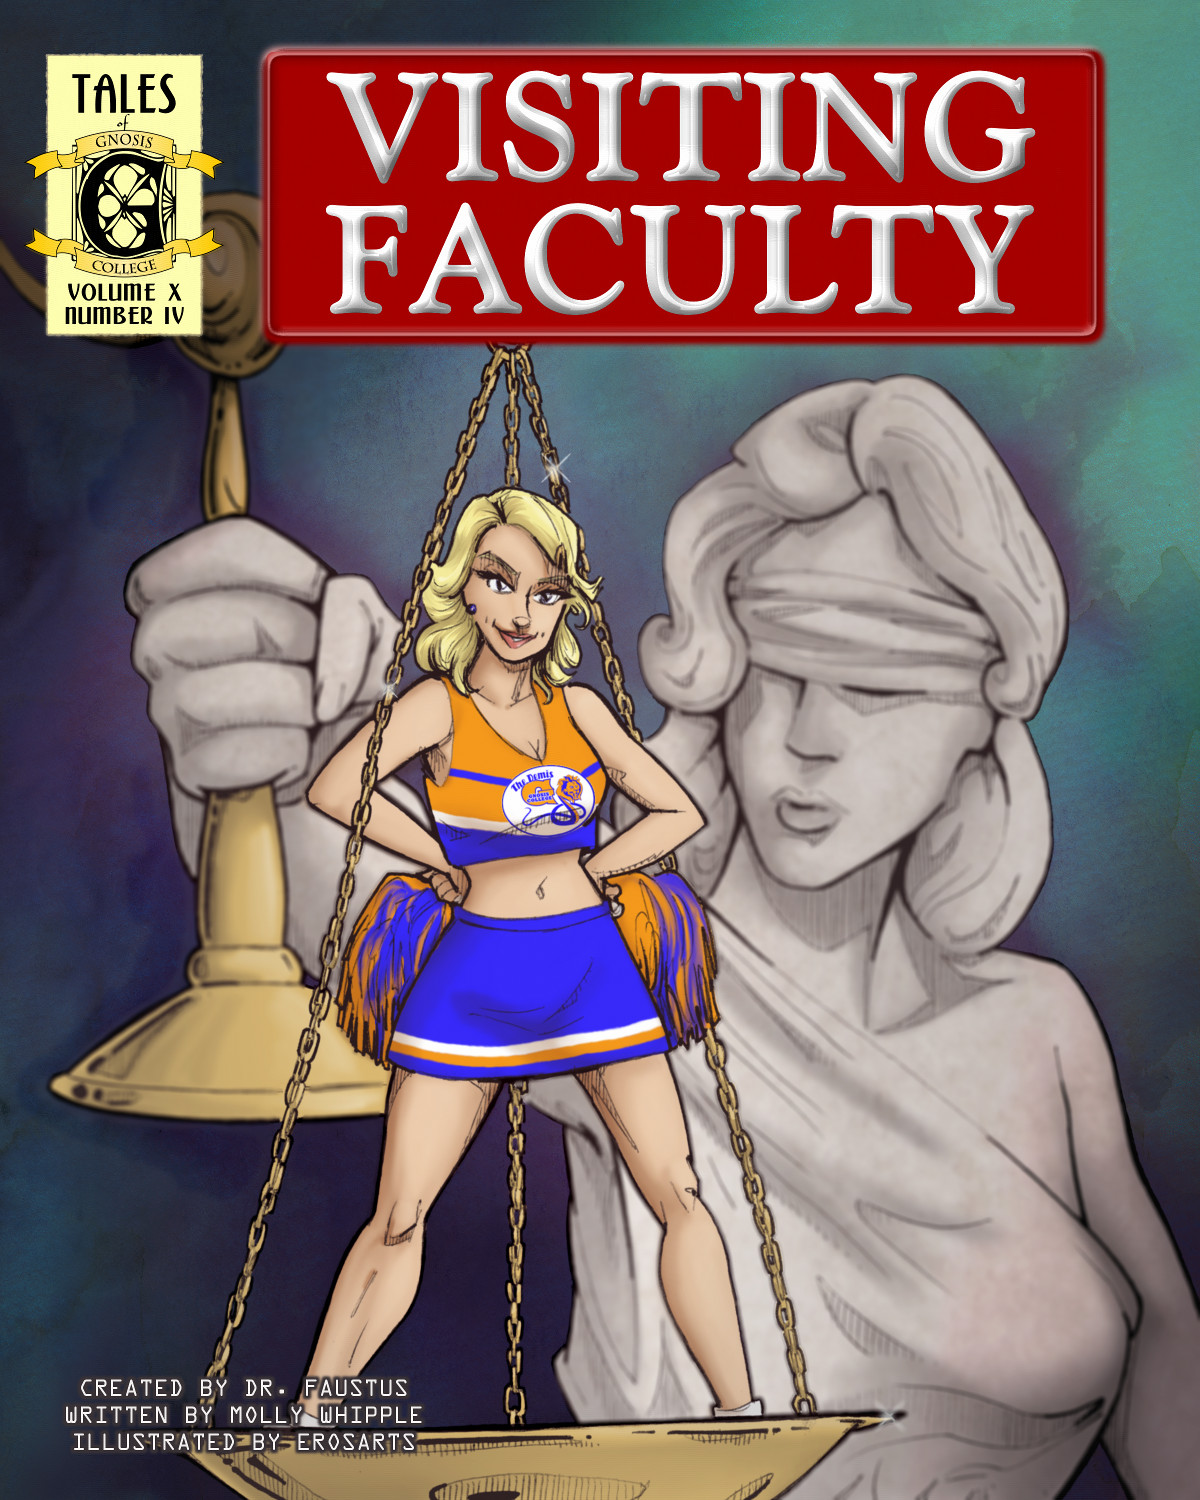 Time for cheerleader heroics at Gnosis College